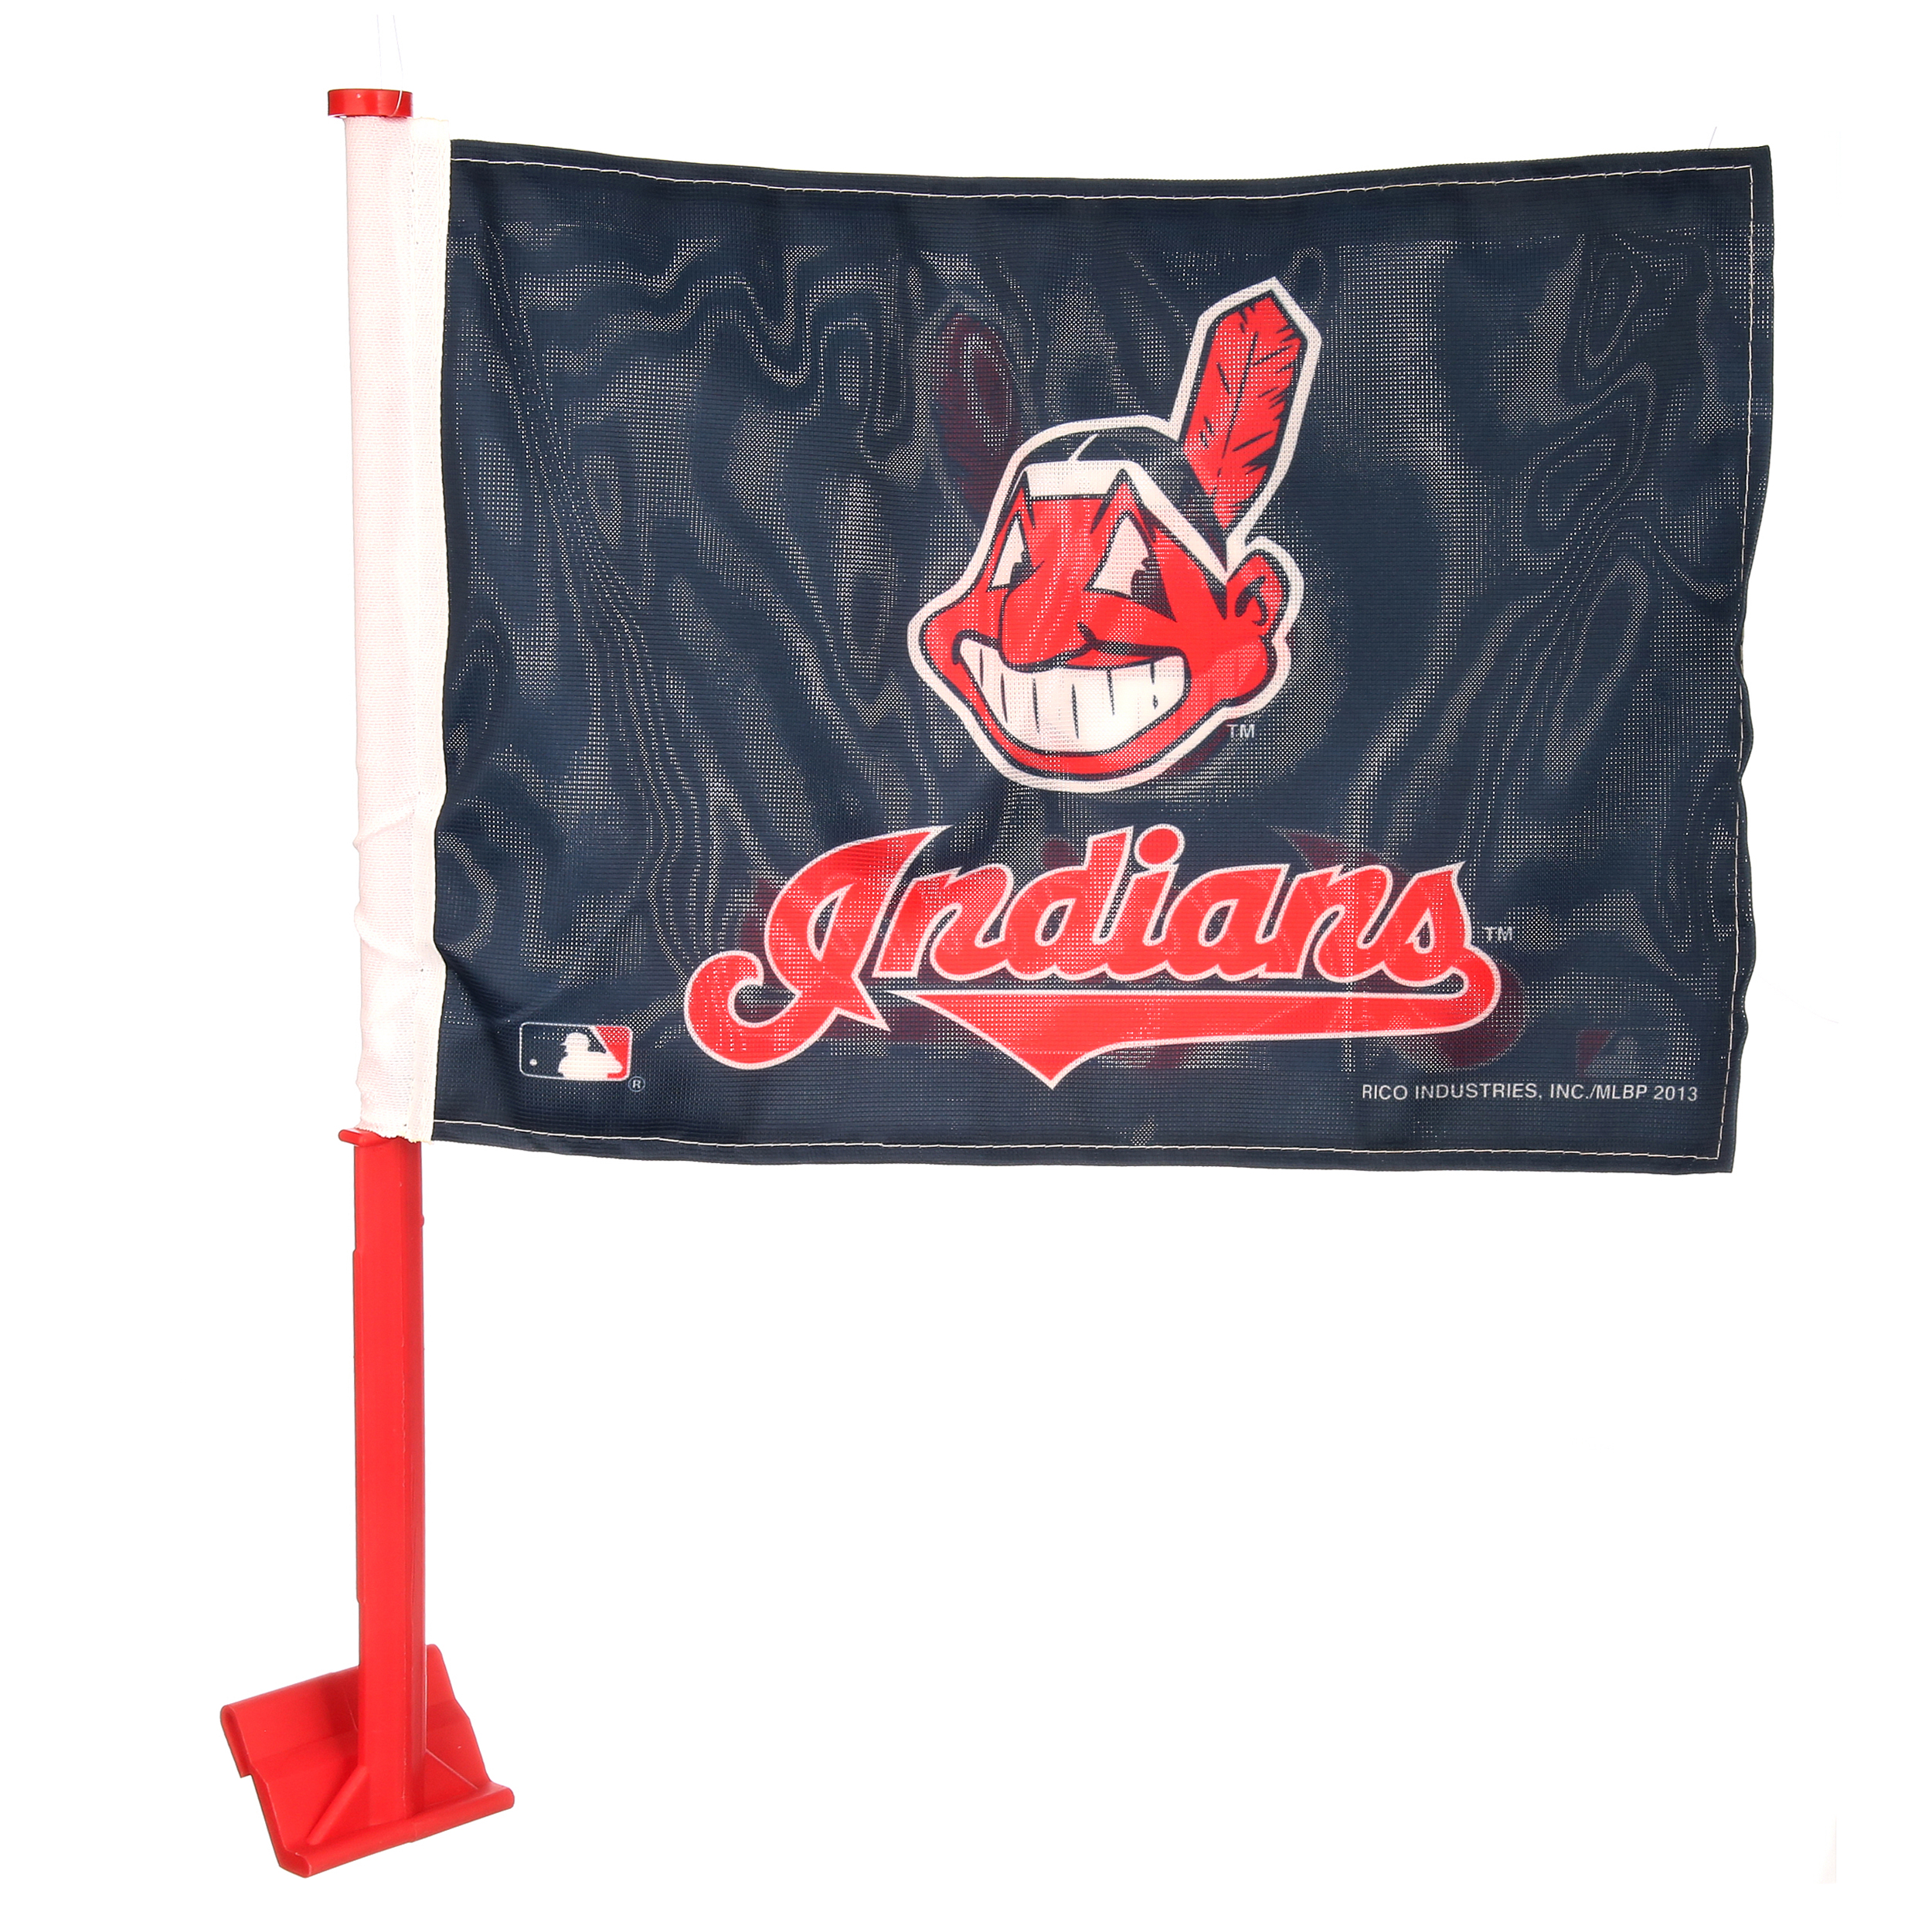 Rico Industries MLB Indians Car Flag with Colored Pole, Red Pole - image 2 of 5